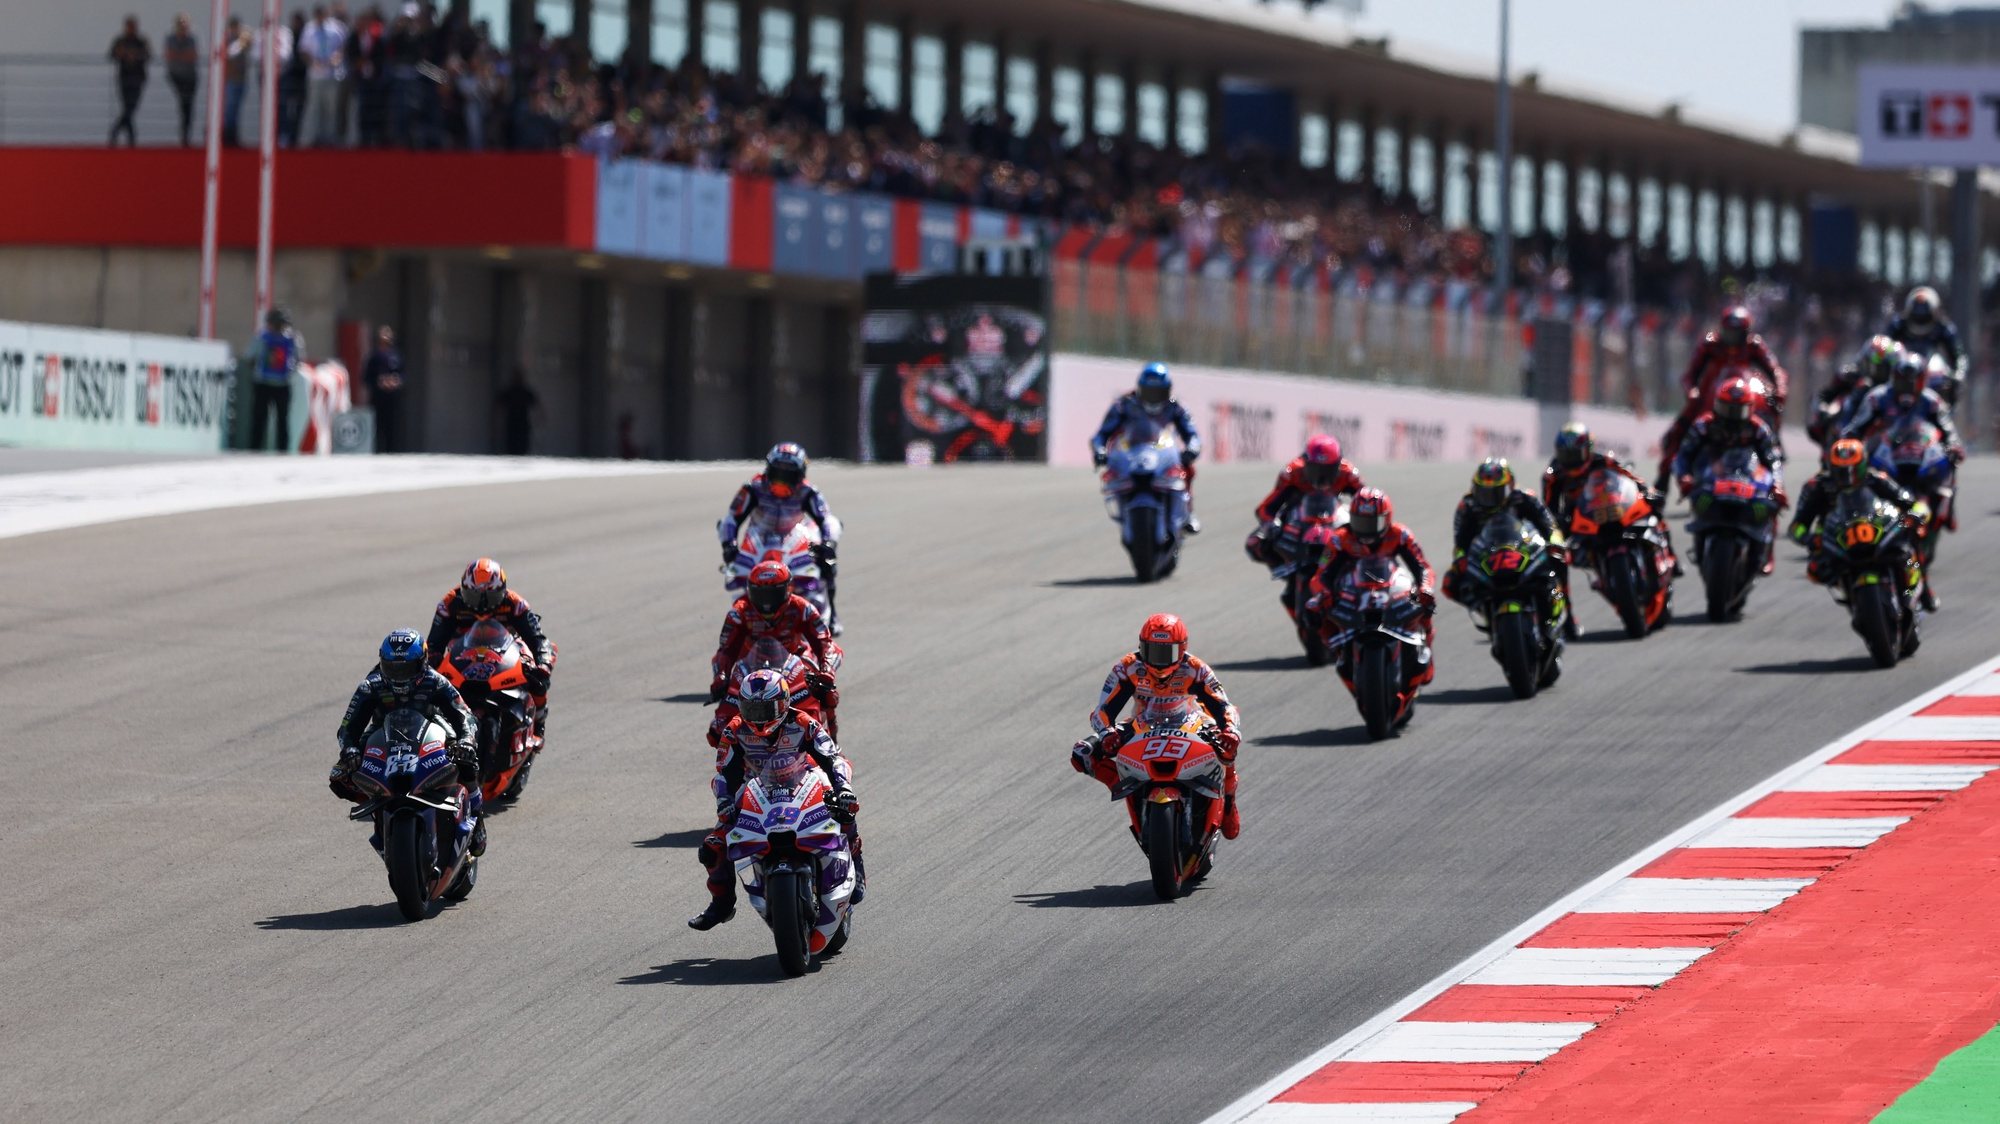 epa10544318 Riders in action at the start of the MotoGP race at the Motorcycling Grand Prix of Portugal at Algarve International race track, Portimao, Portugal, 26 March 2023.  EPA/NUNO VEIGA